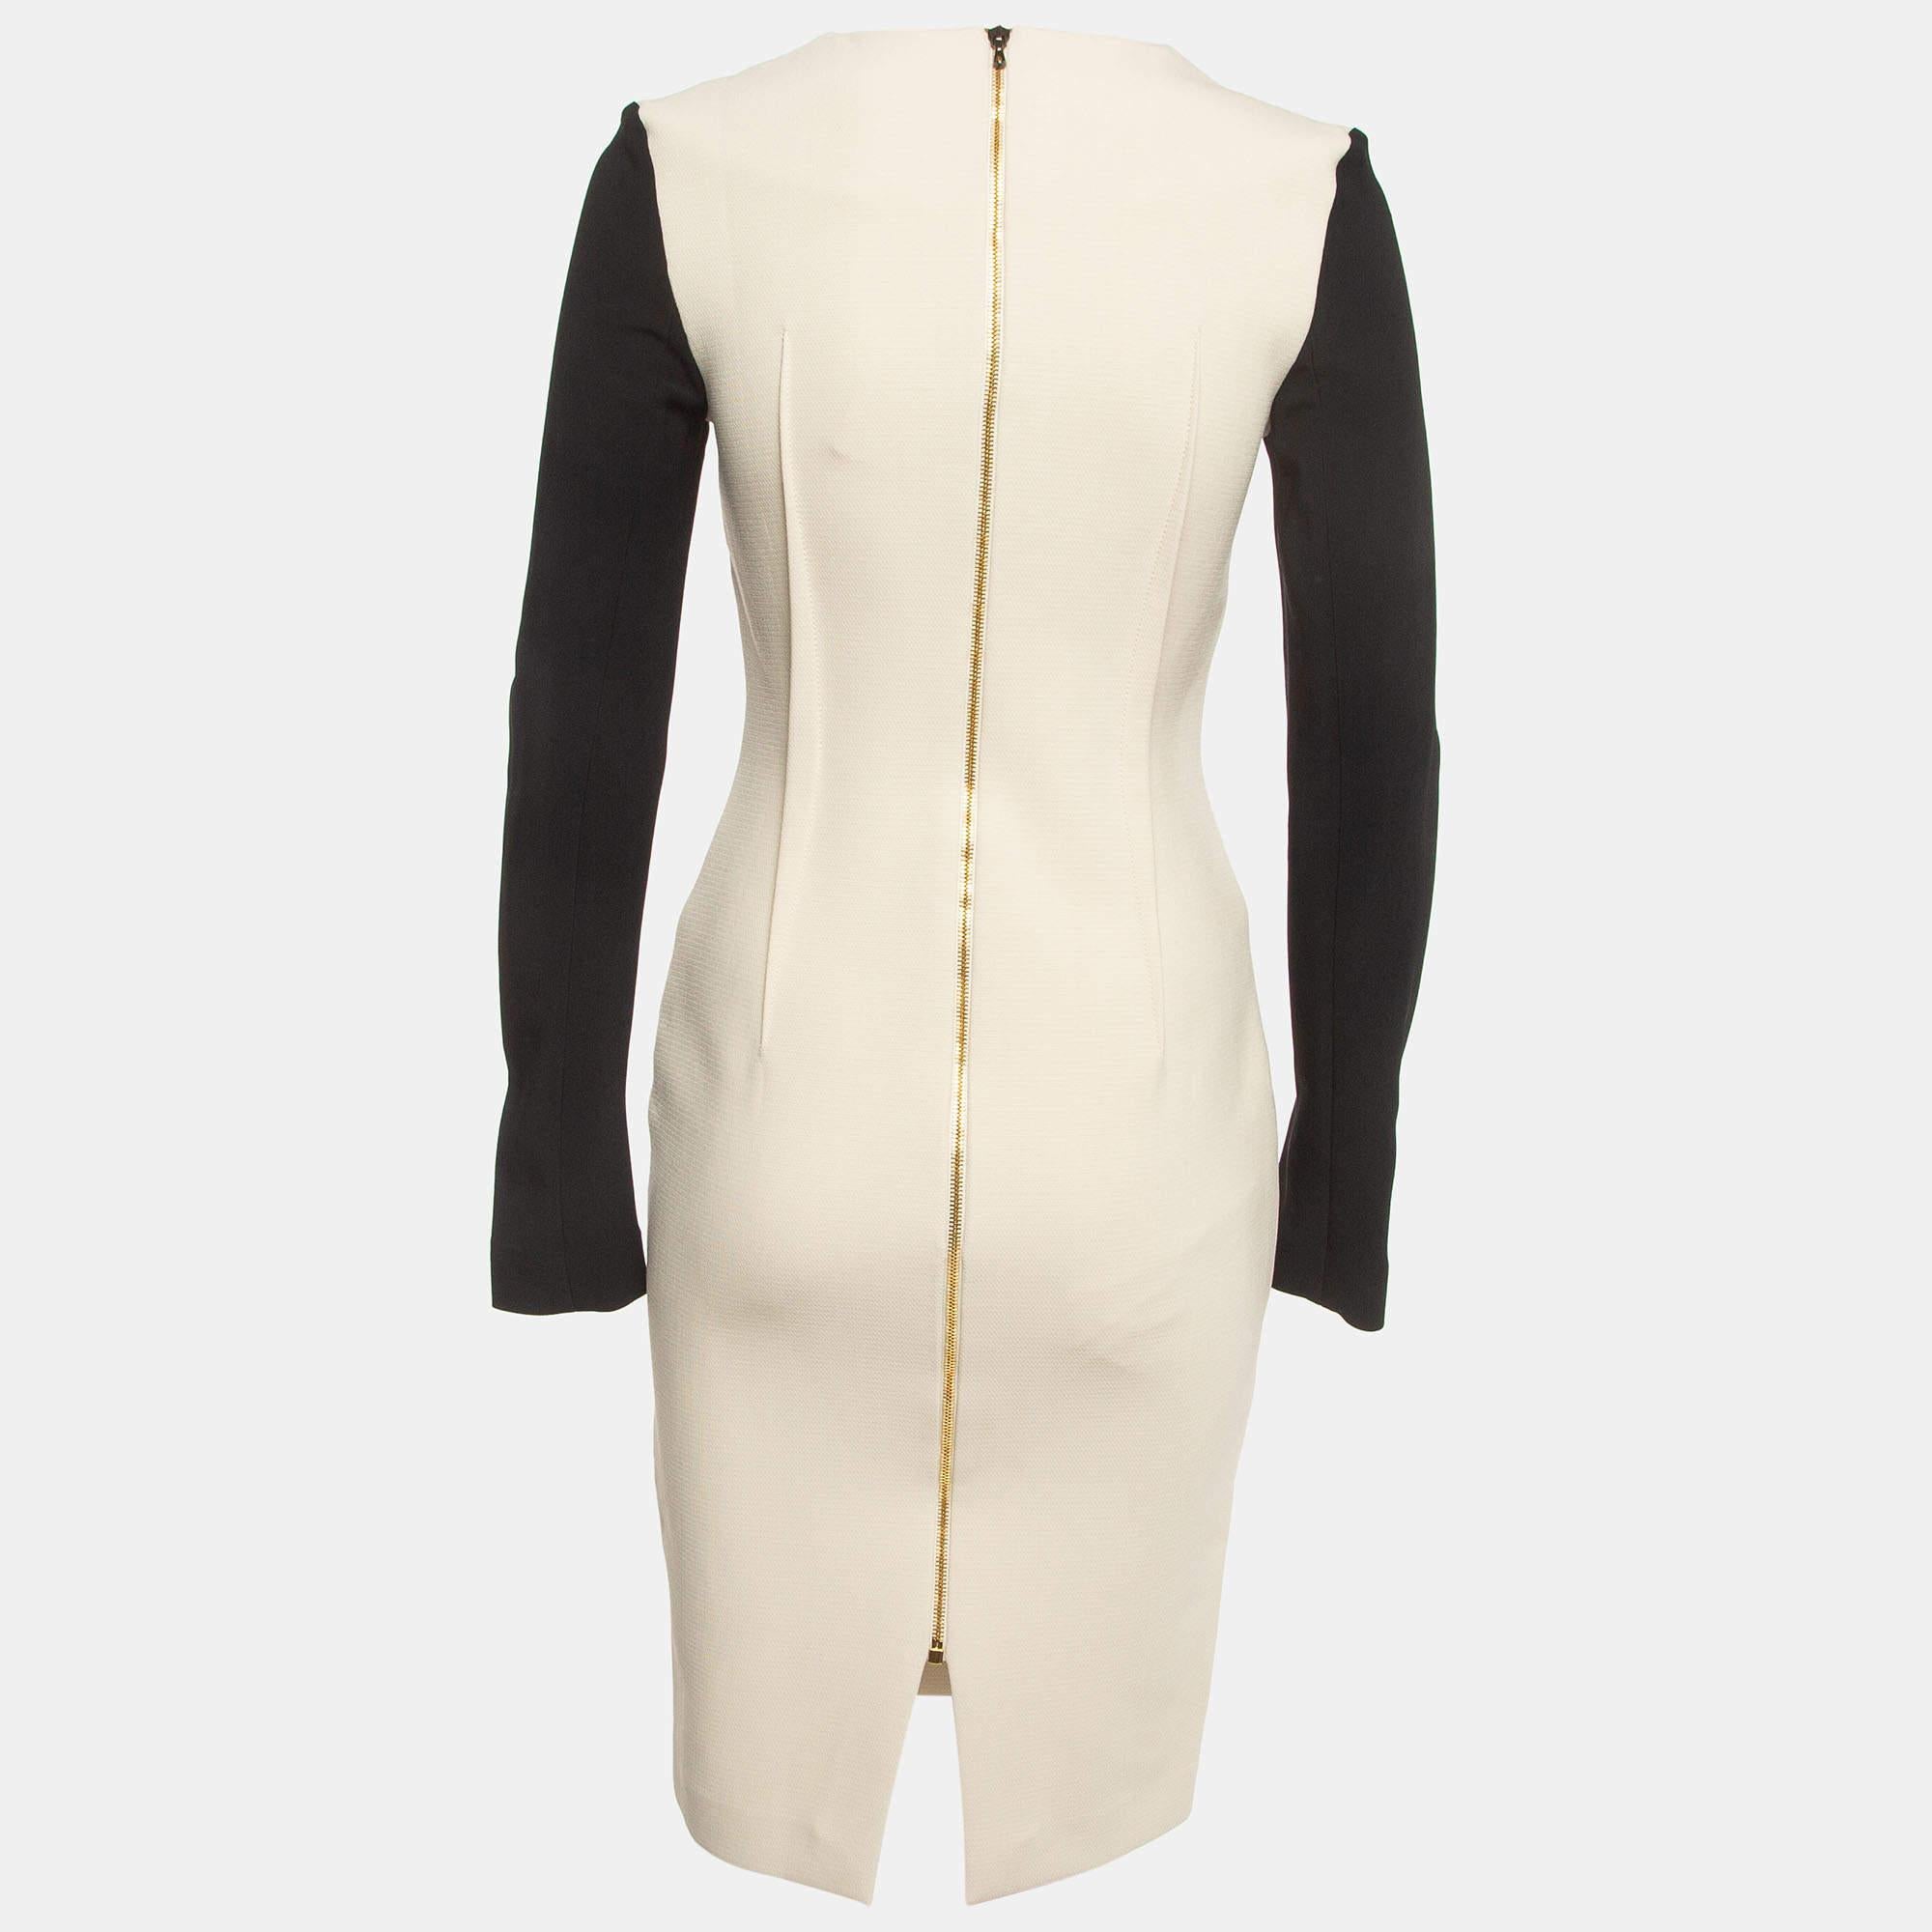 The Roland Mouret Kutim dress combines timeless elegance with contemporary flair. Crafted from a luxurious wool blend, this dress features a monochrome color block design that effortlessly flatters the silhouette. With its long sleeves and a